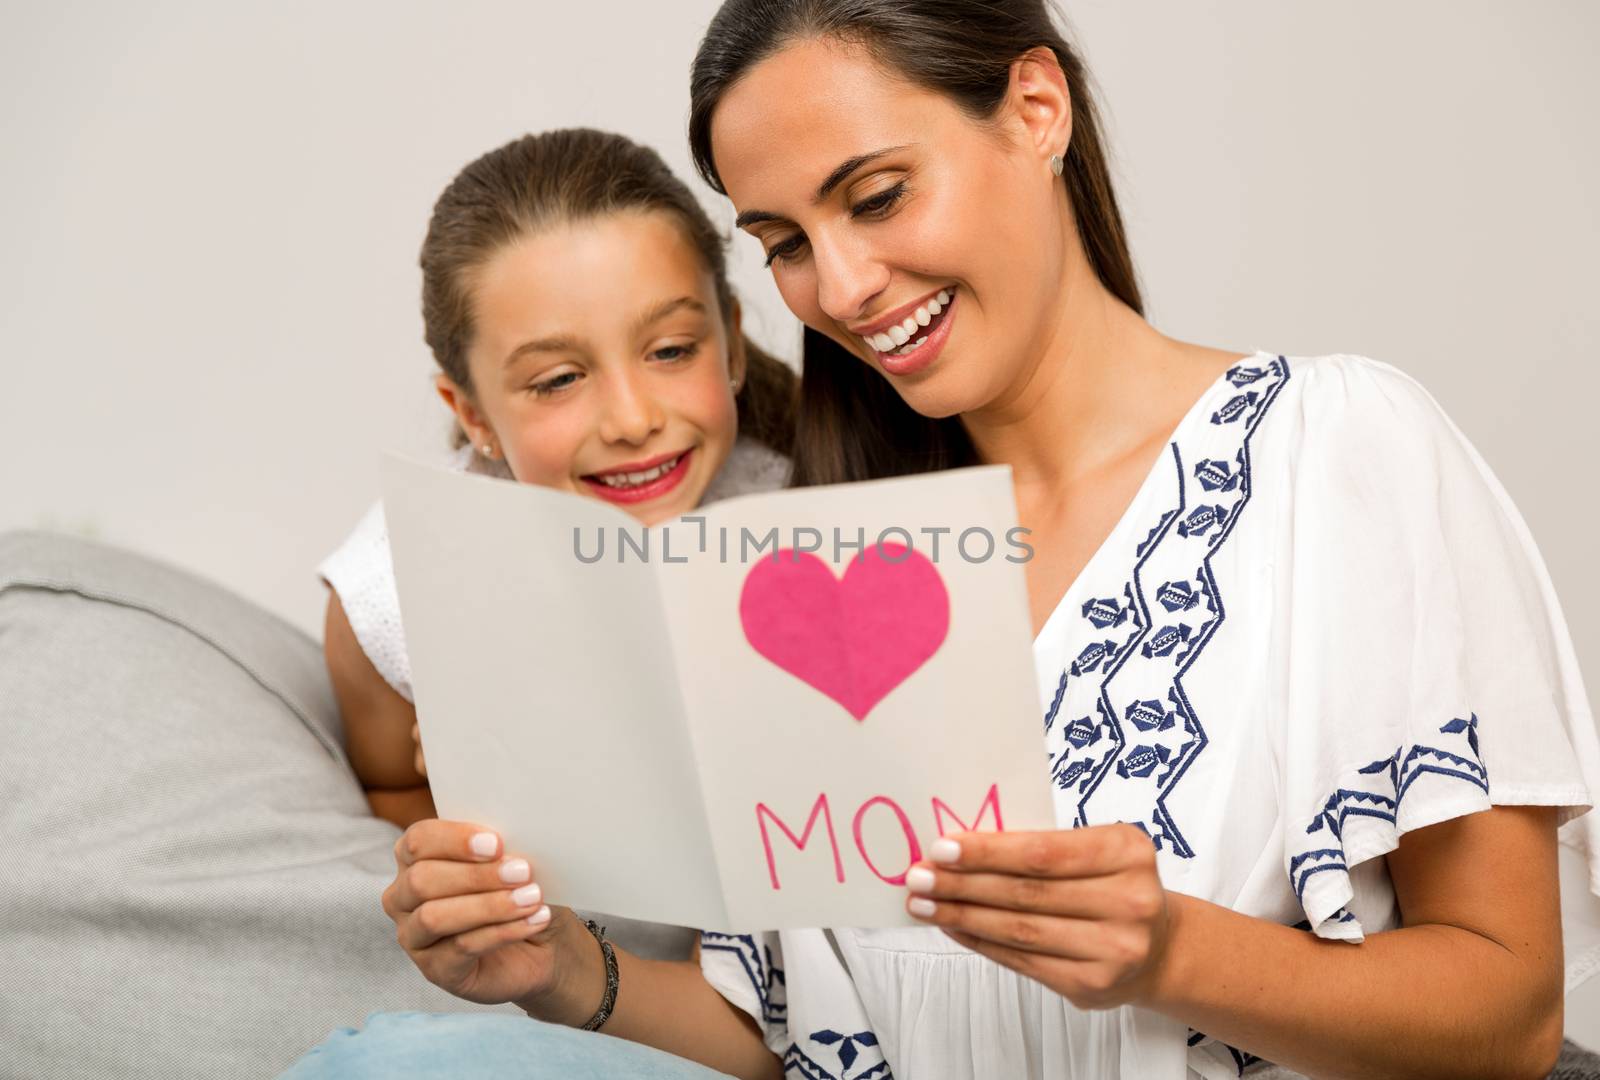 Mother receiving a greeting card on mother's day from her daughter